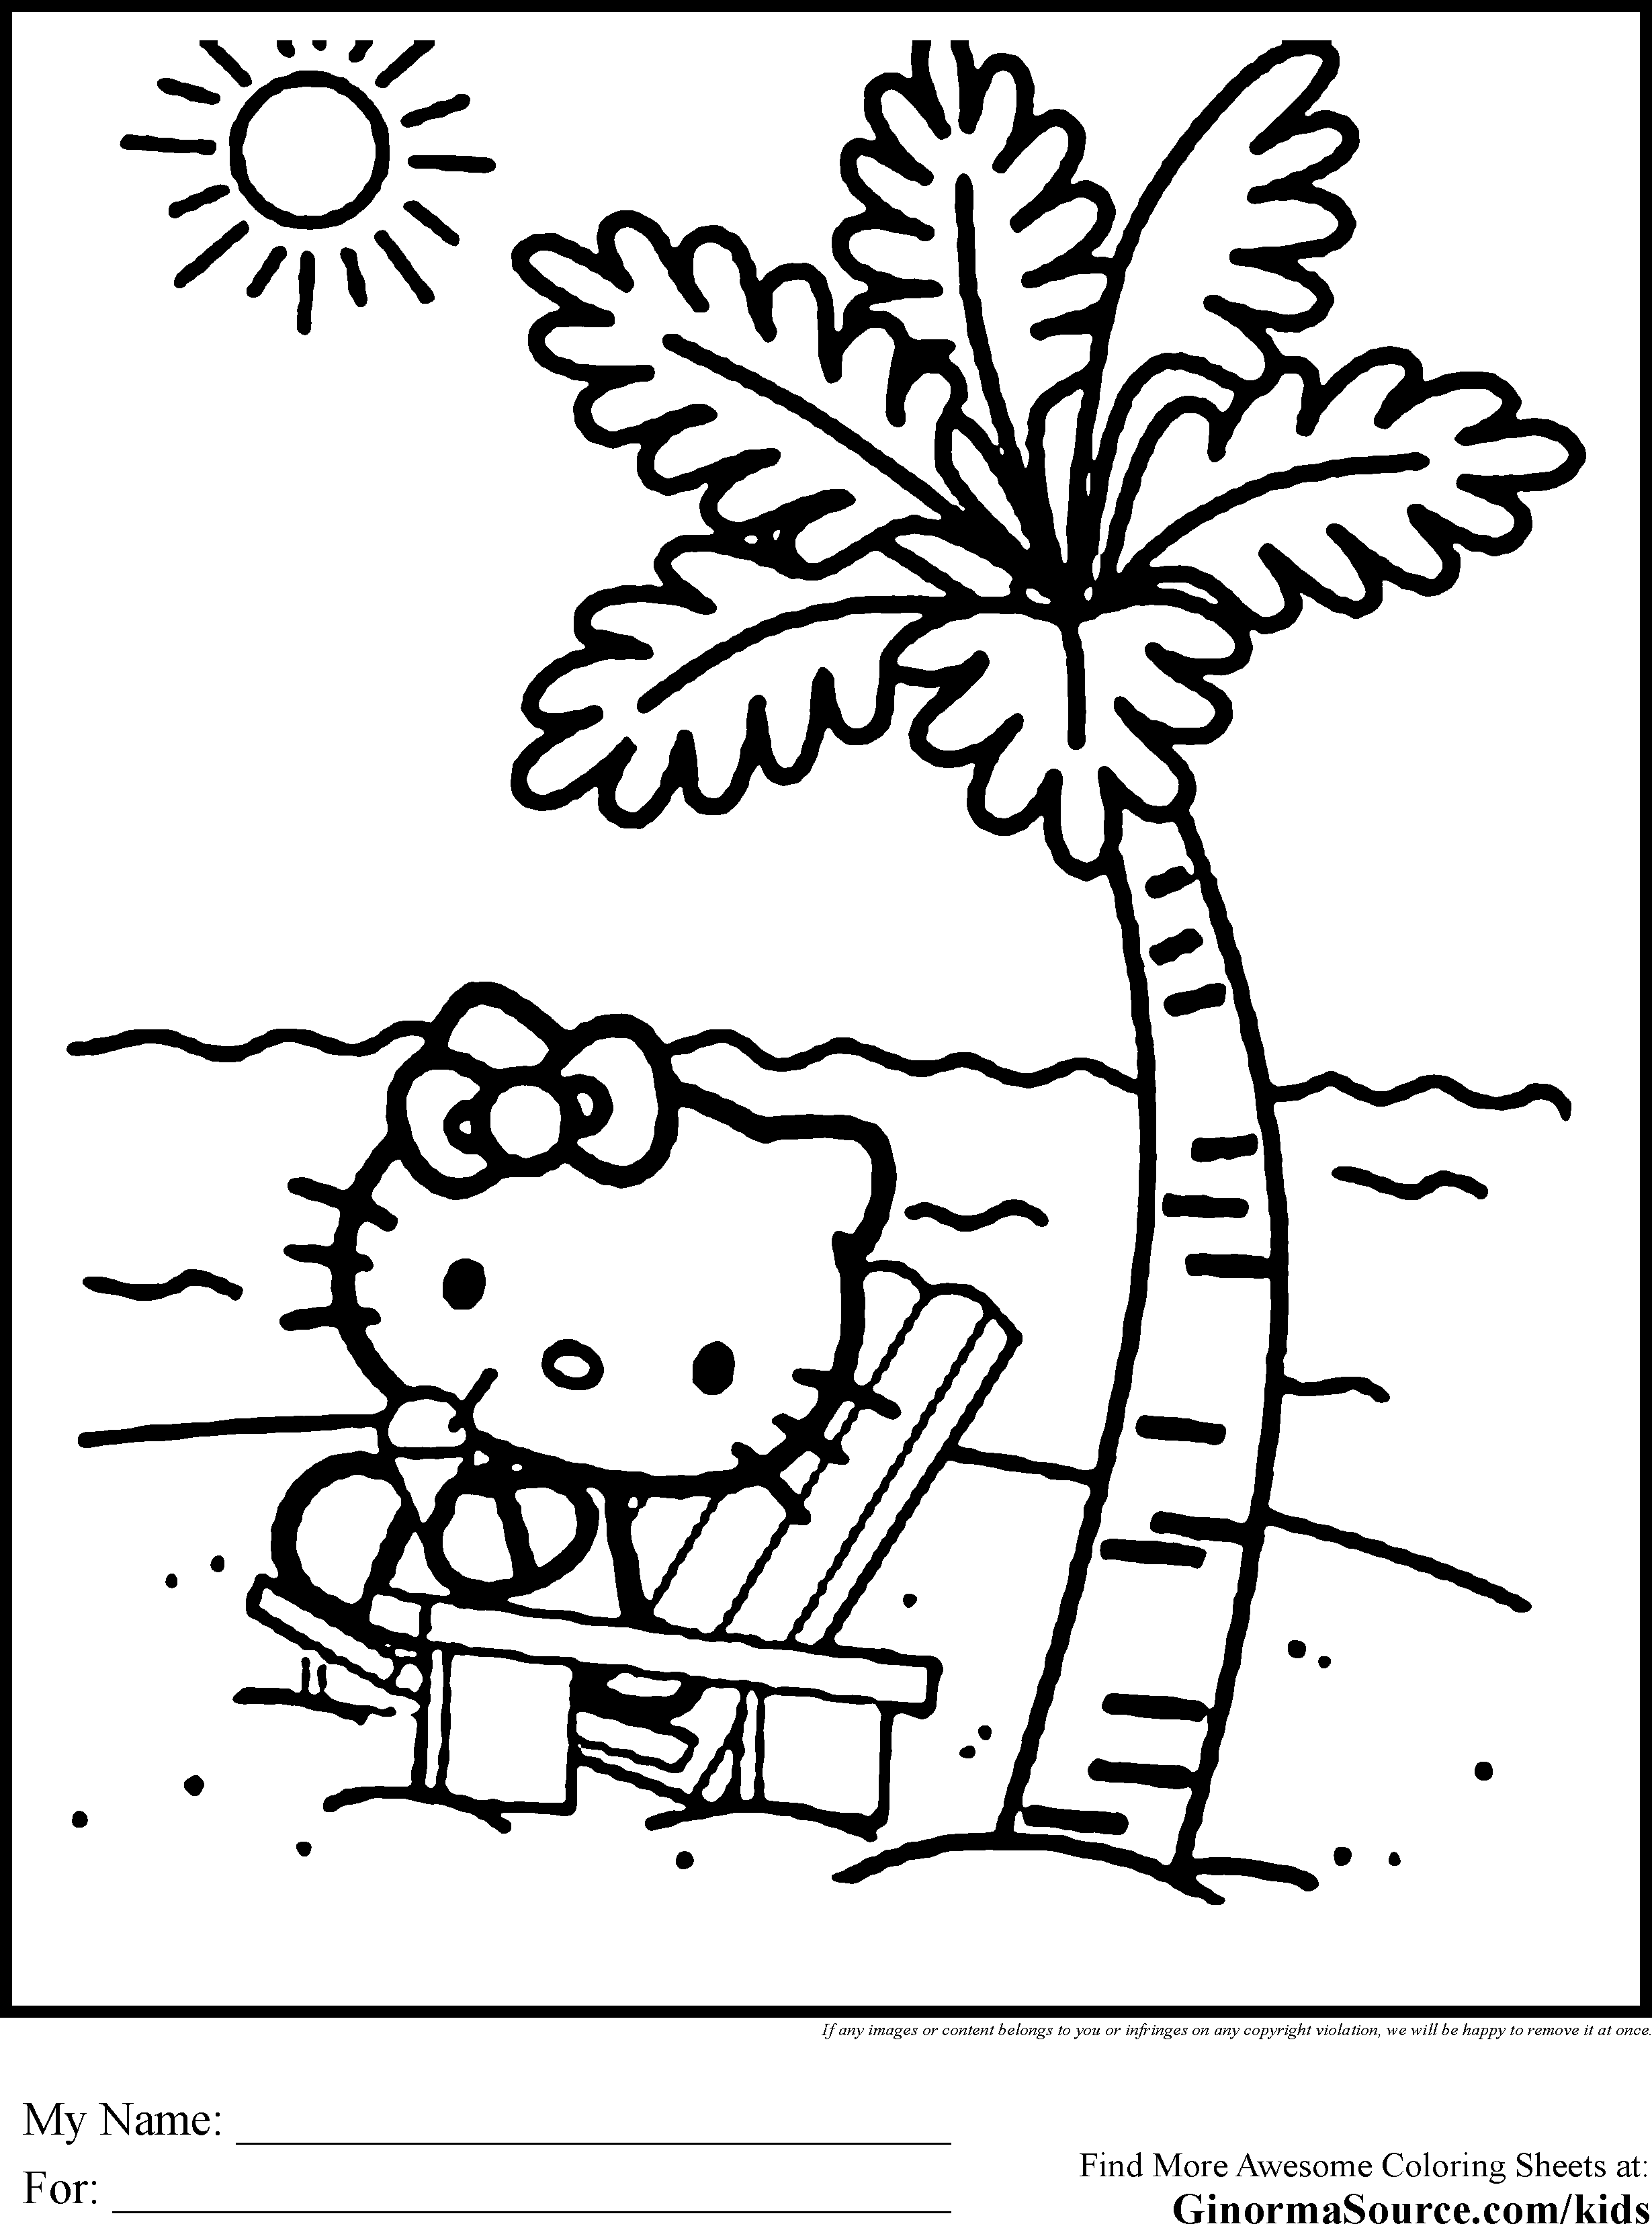 Black And White Hello Kitty Nerd Coloring Pages - Coloring Pages ...